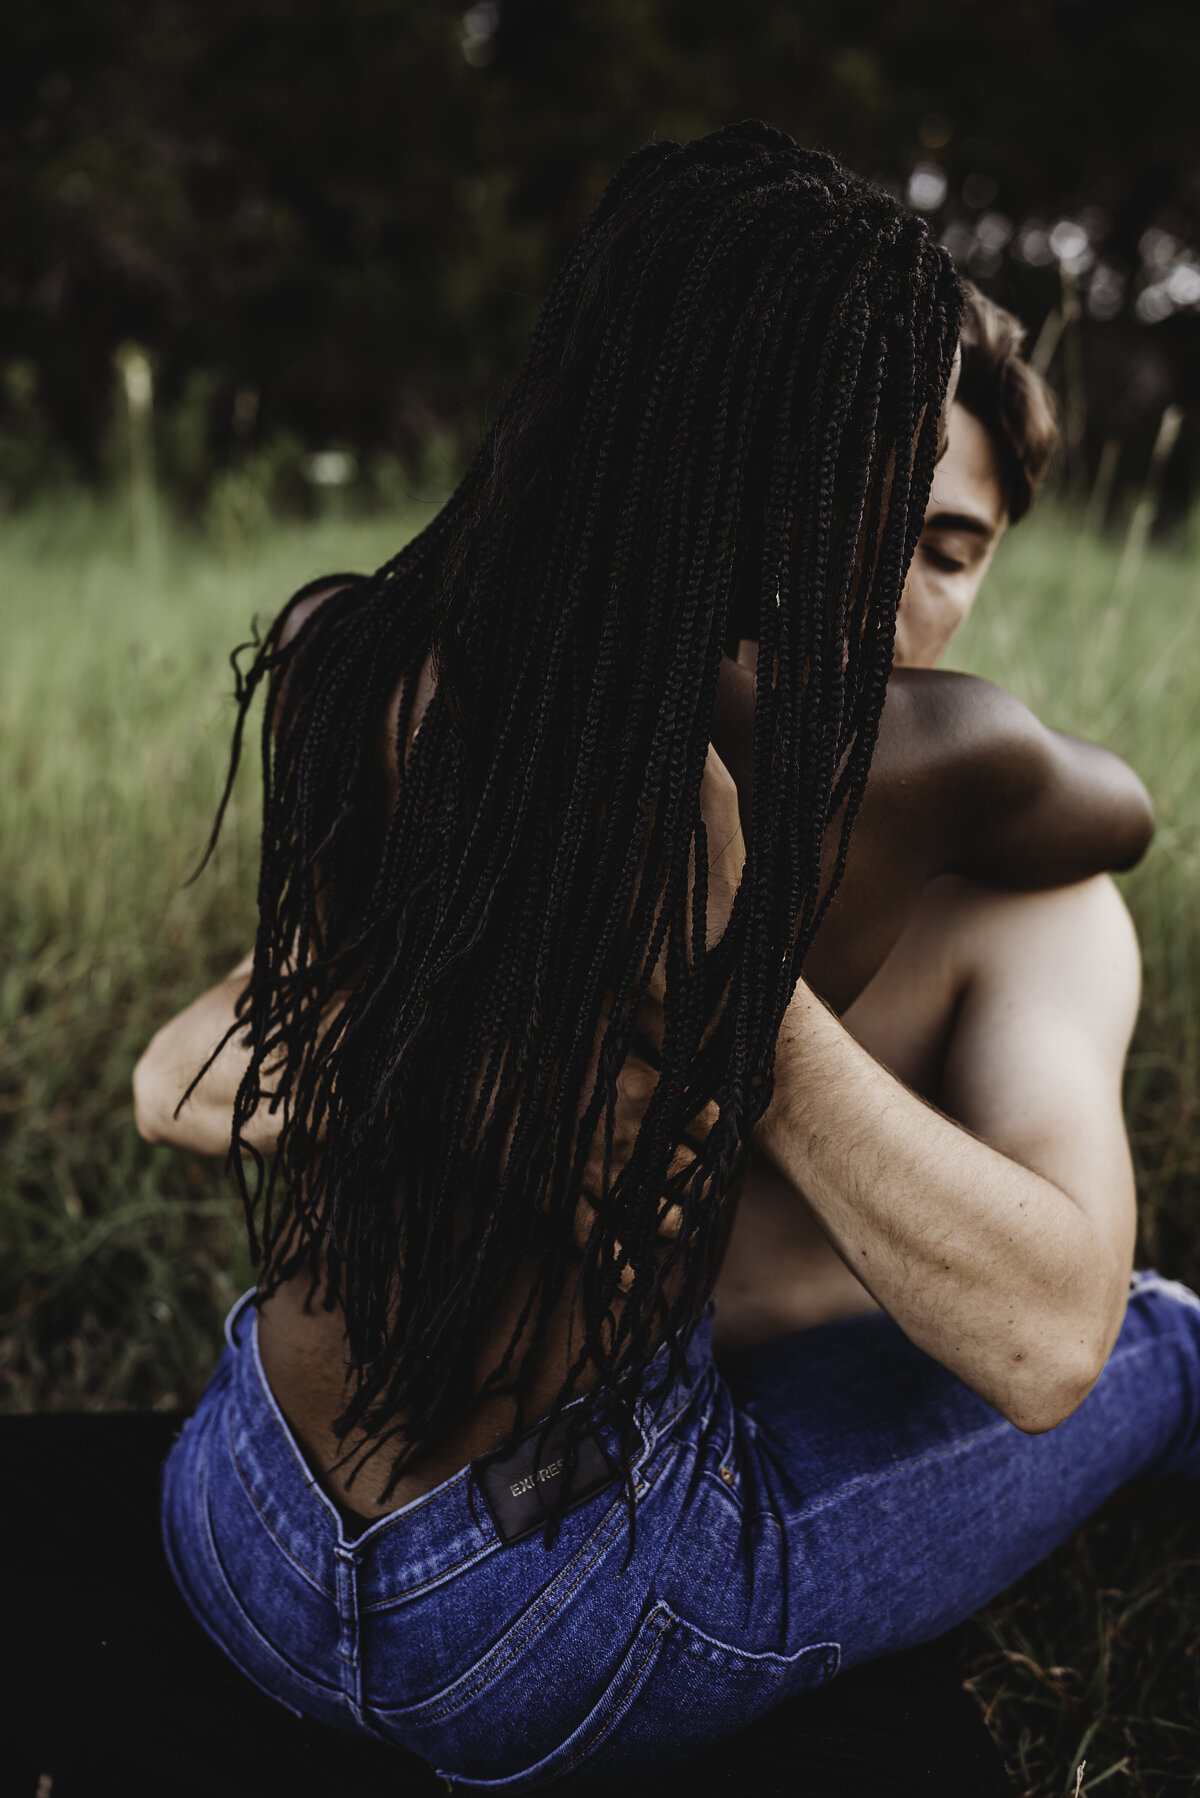 black woman and white man topless holding each other